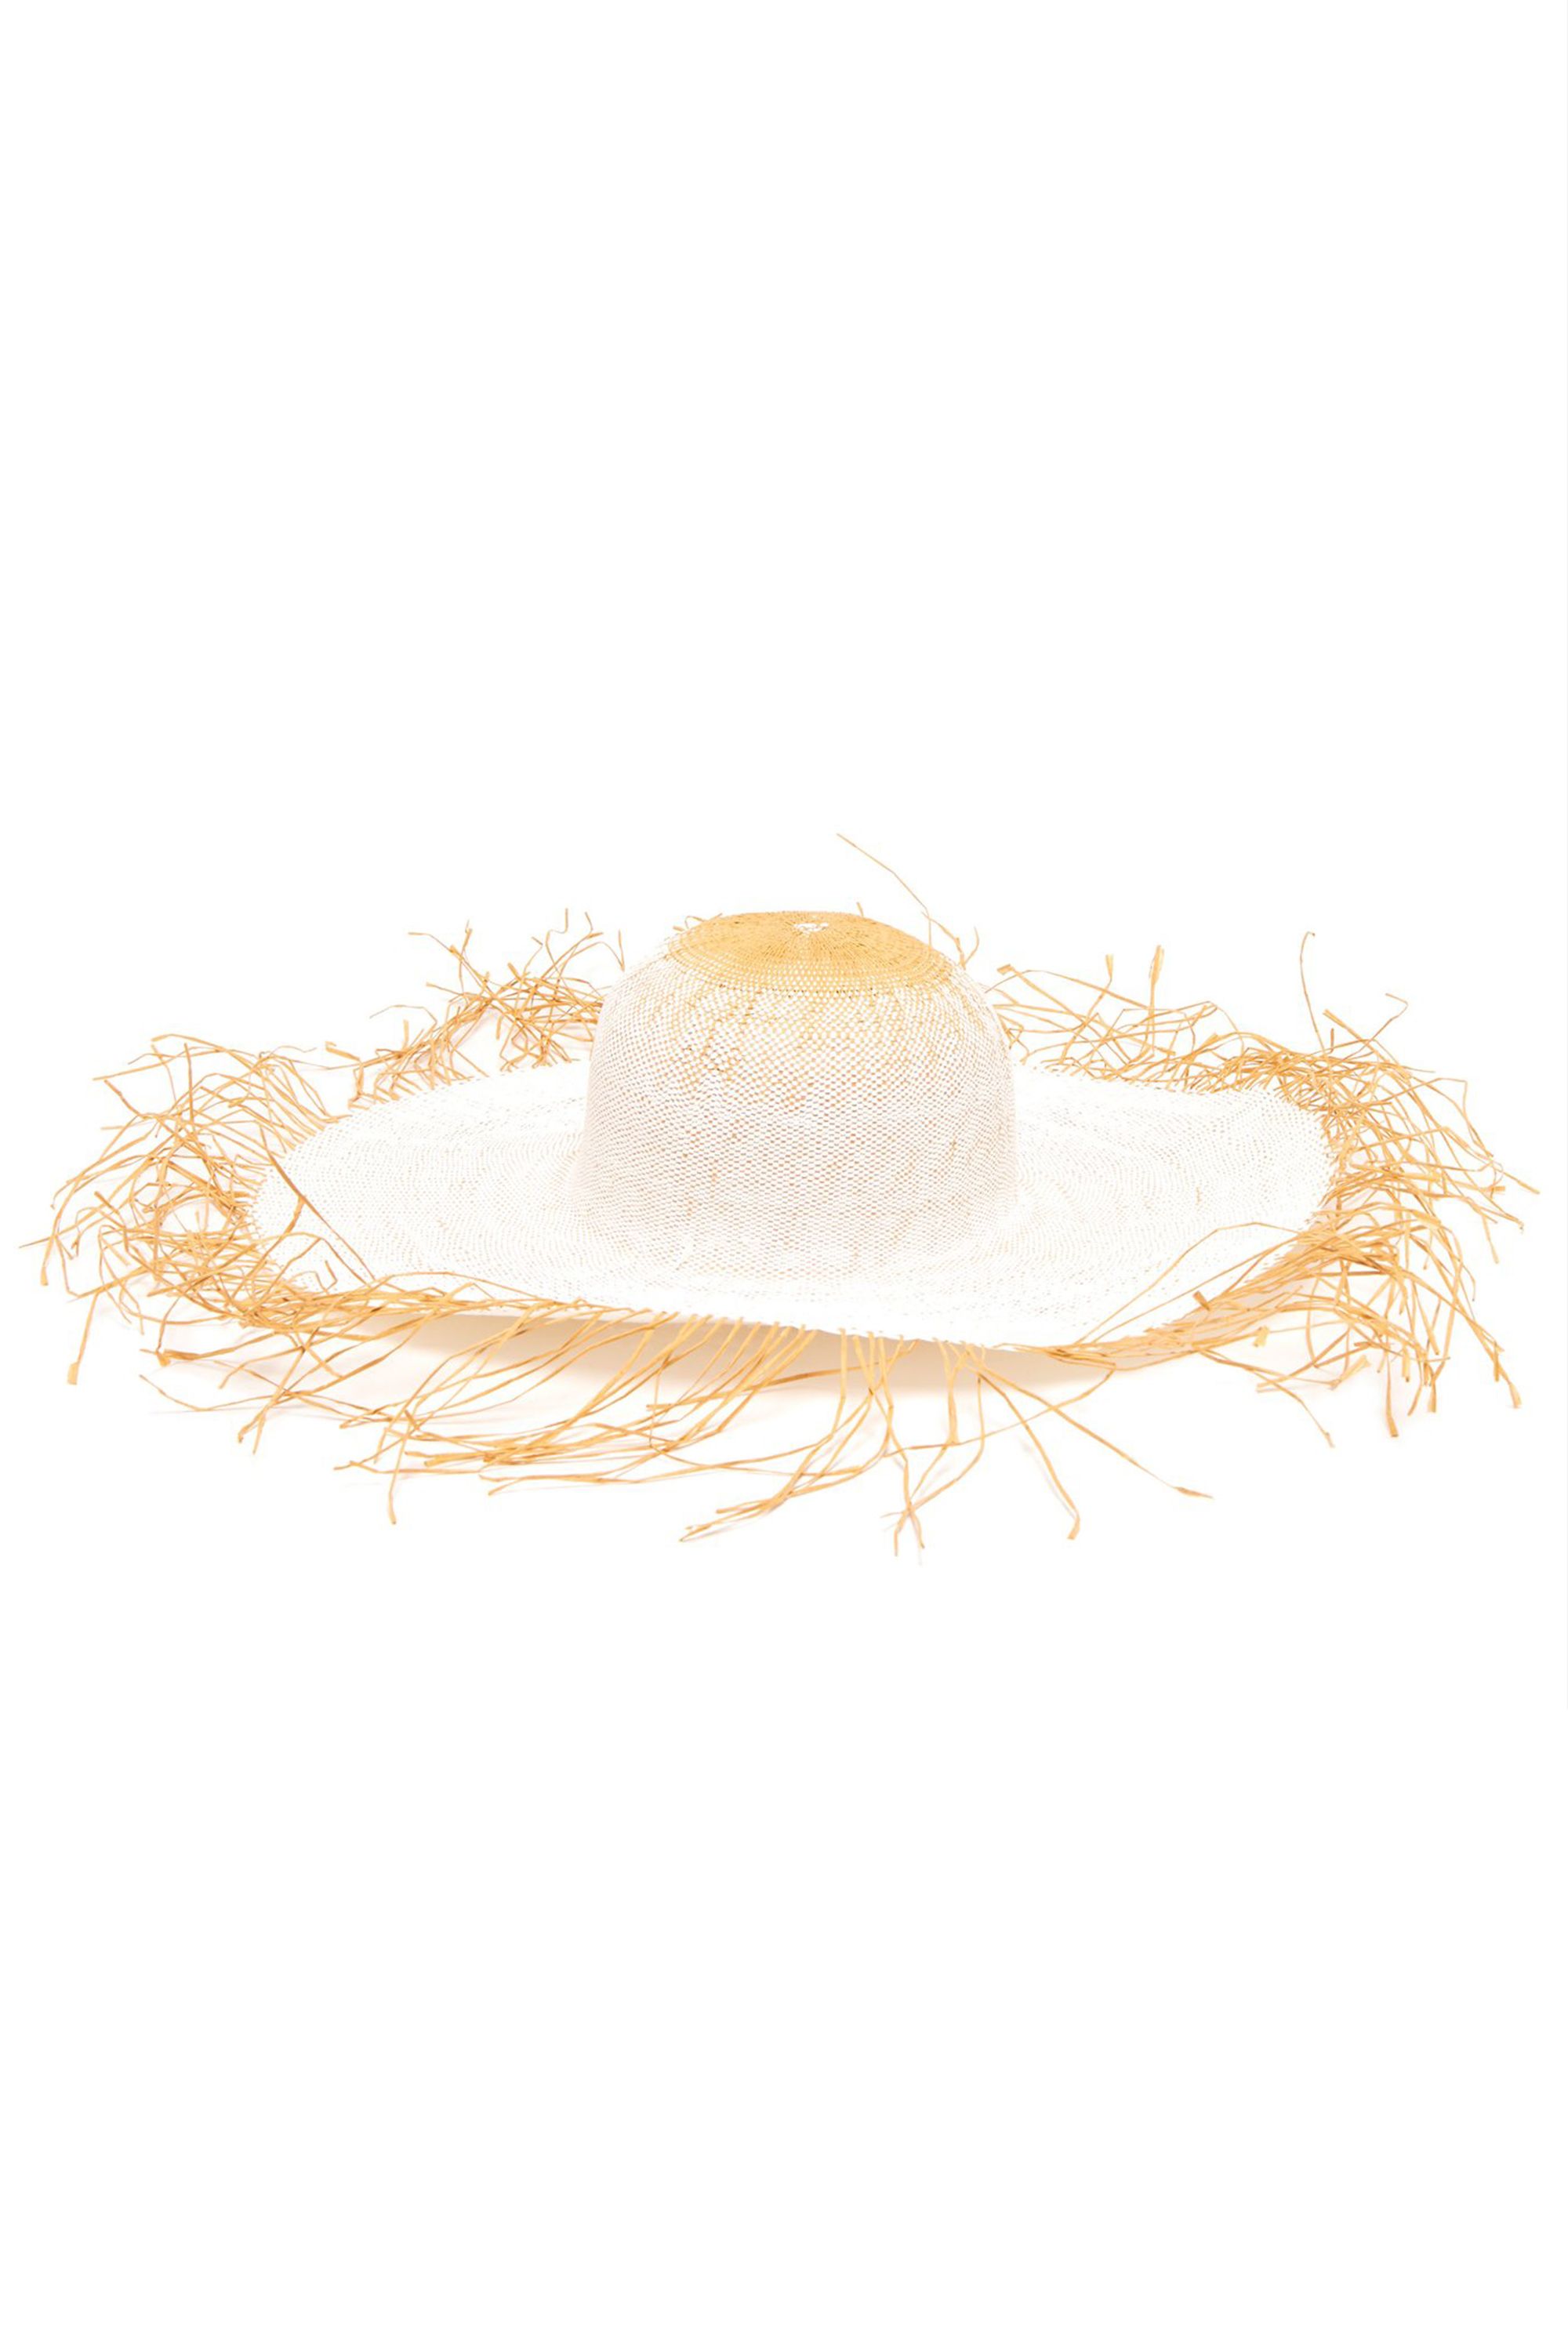 8 best straw hats to buy this summer – Straw hat guide 2020